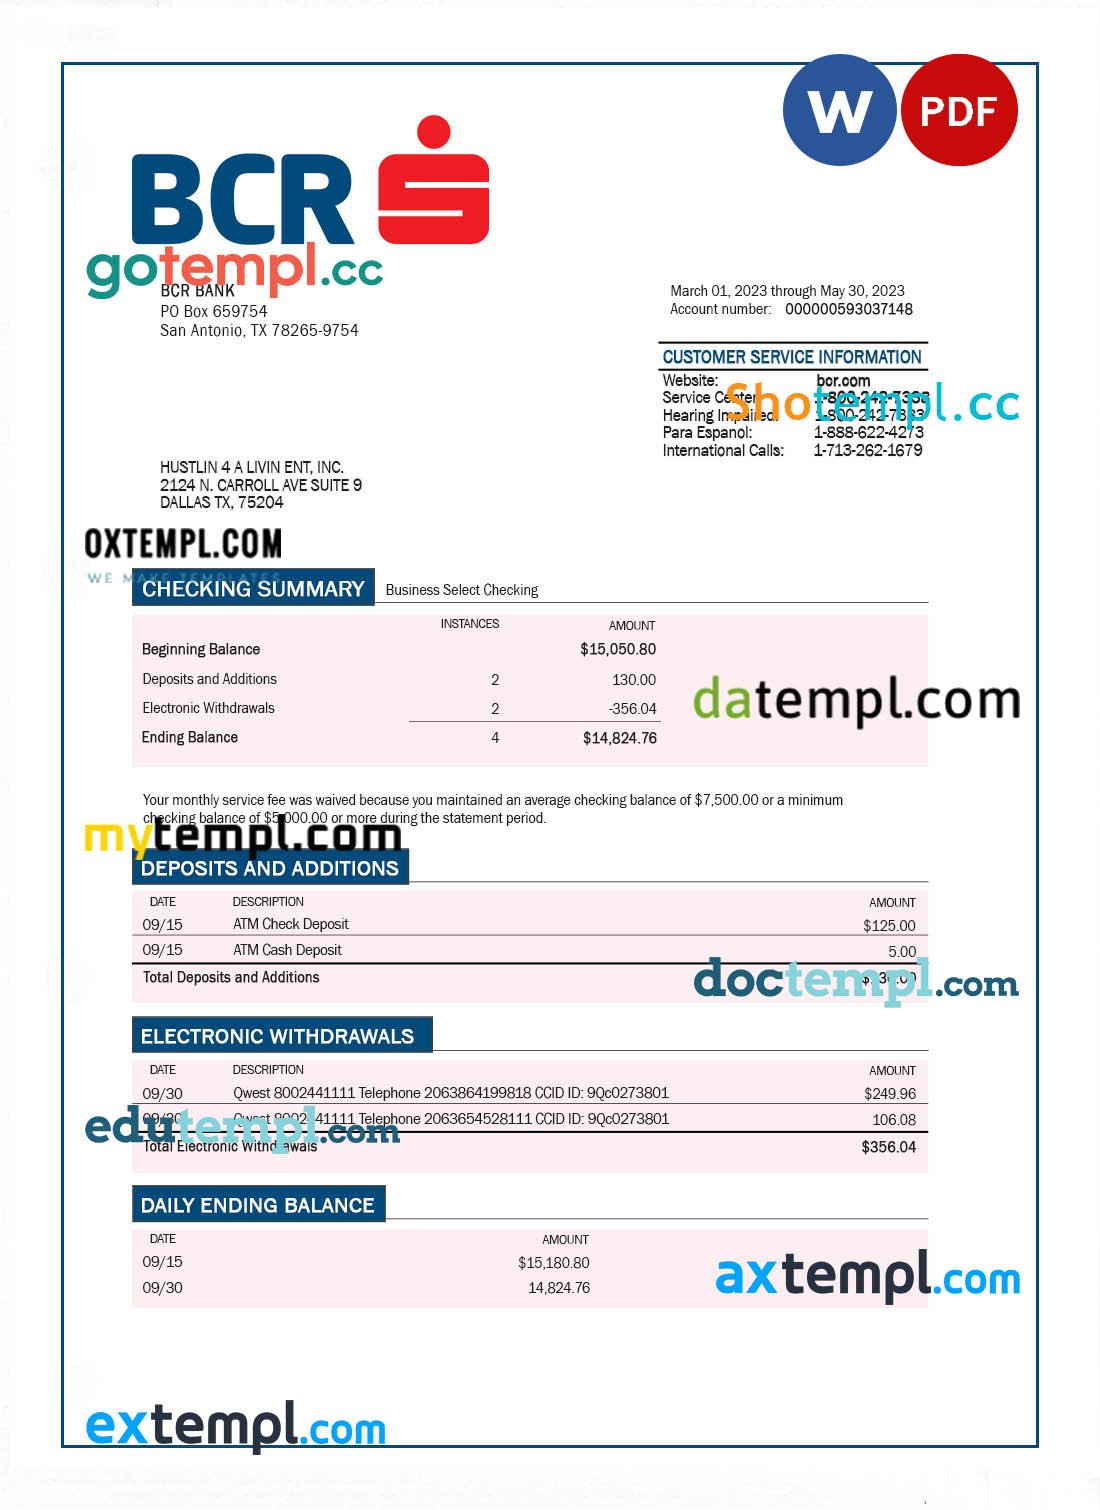 LA Banque Postale firm bank statement Word and PDF template